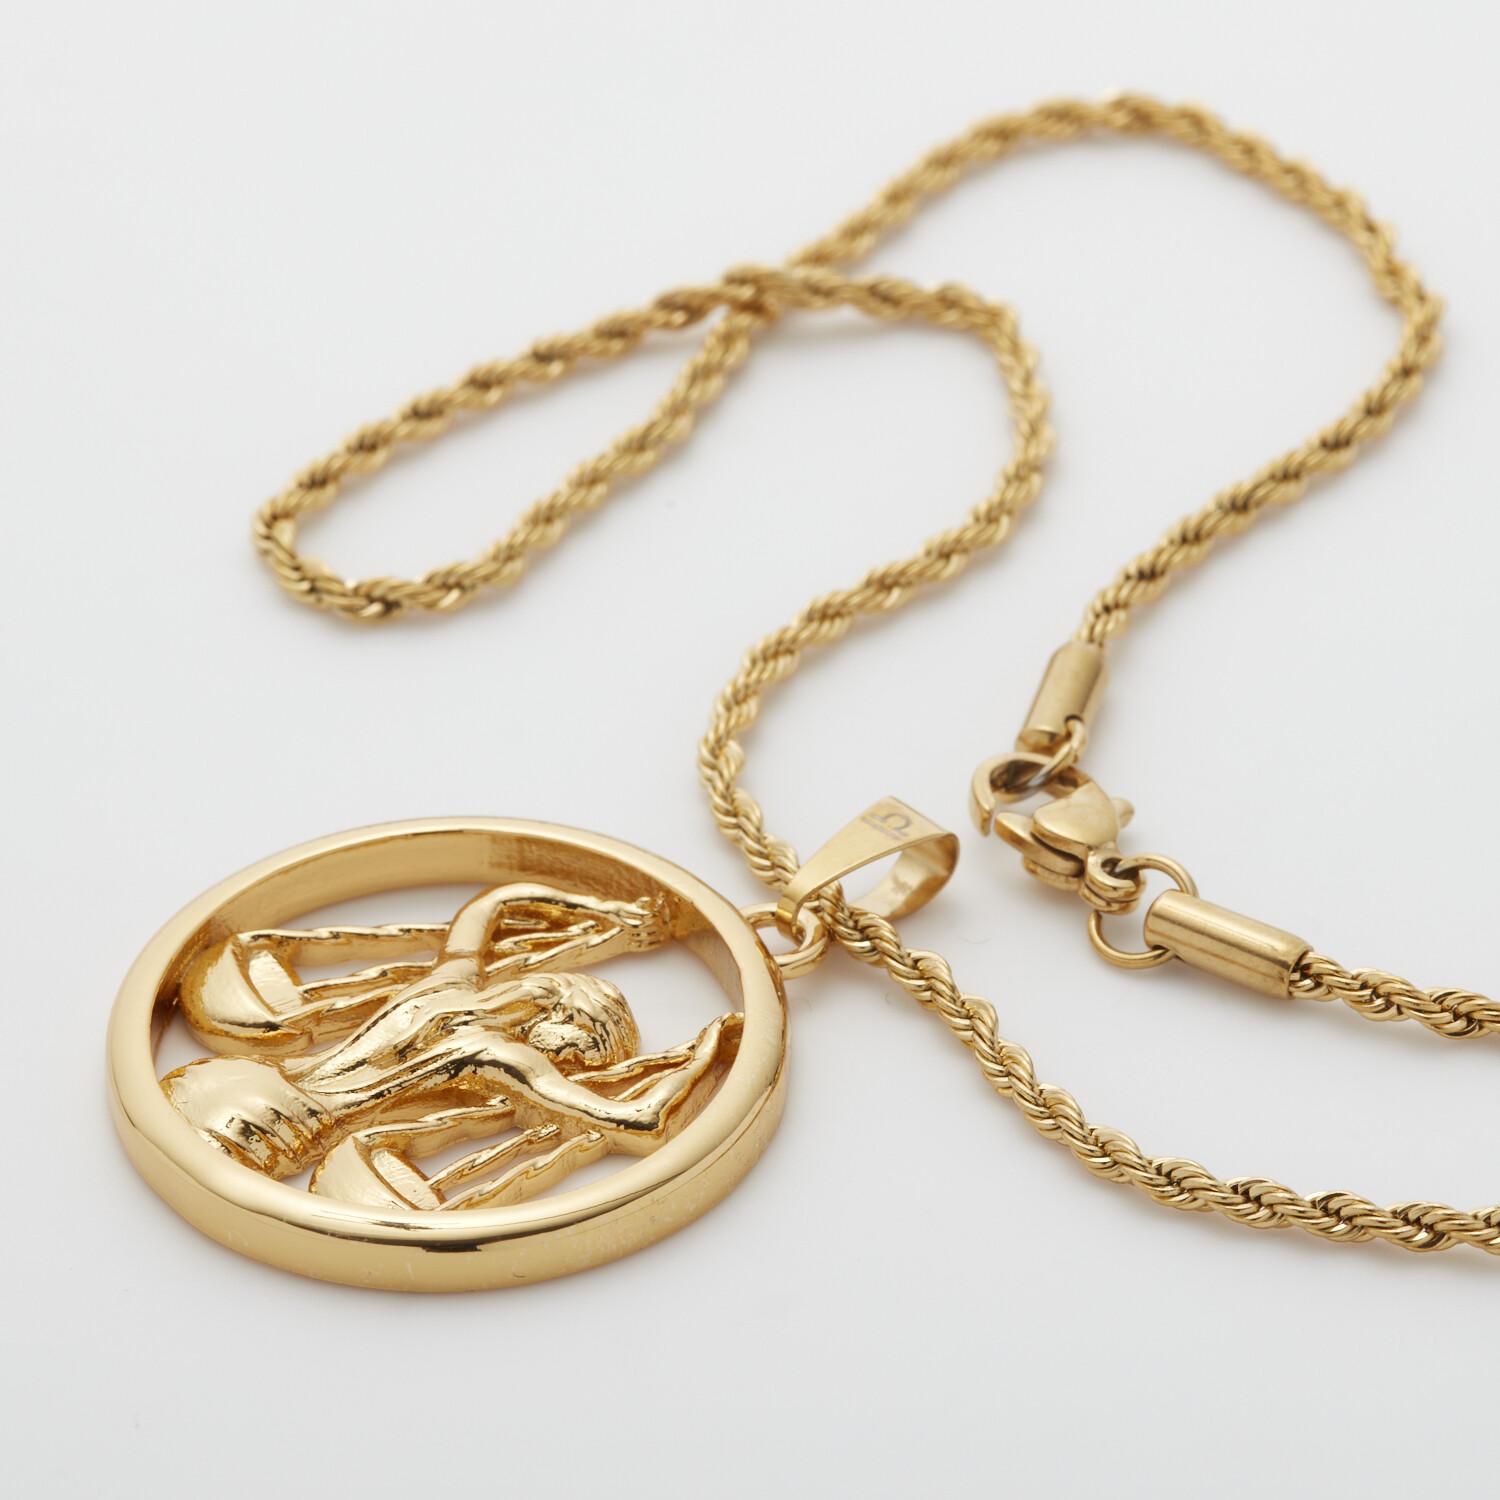 The Eternal Zodiac “Libra” Pendant features Libra’s defining scales of justice. Libra is an air sign, ruled by Venus—the planet of love. It is of no surprise that those who were born under this sign are all about love, beauty, and balance in their